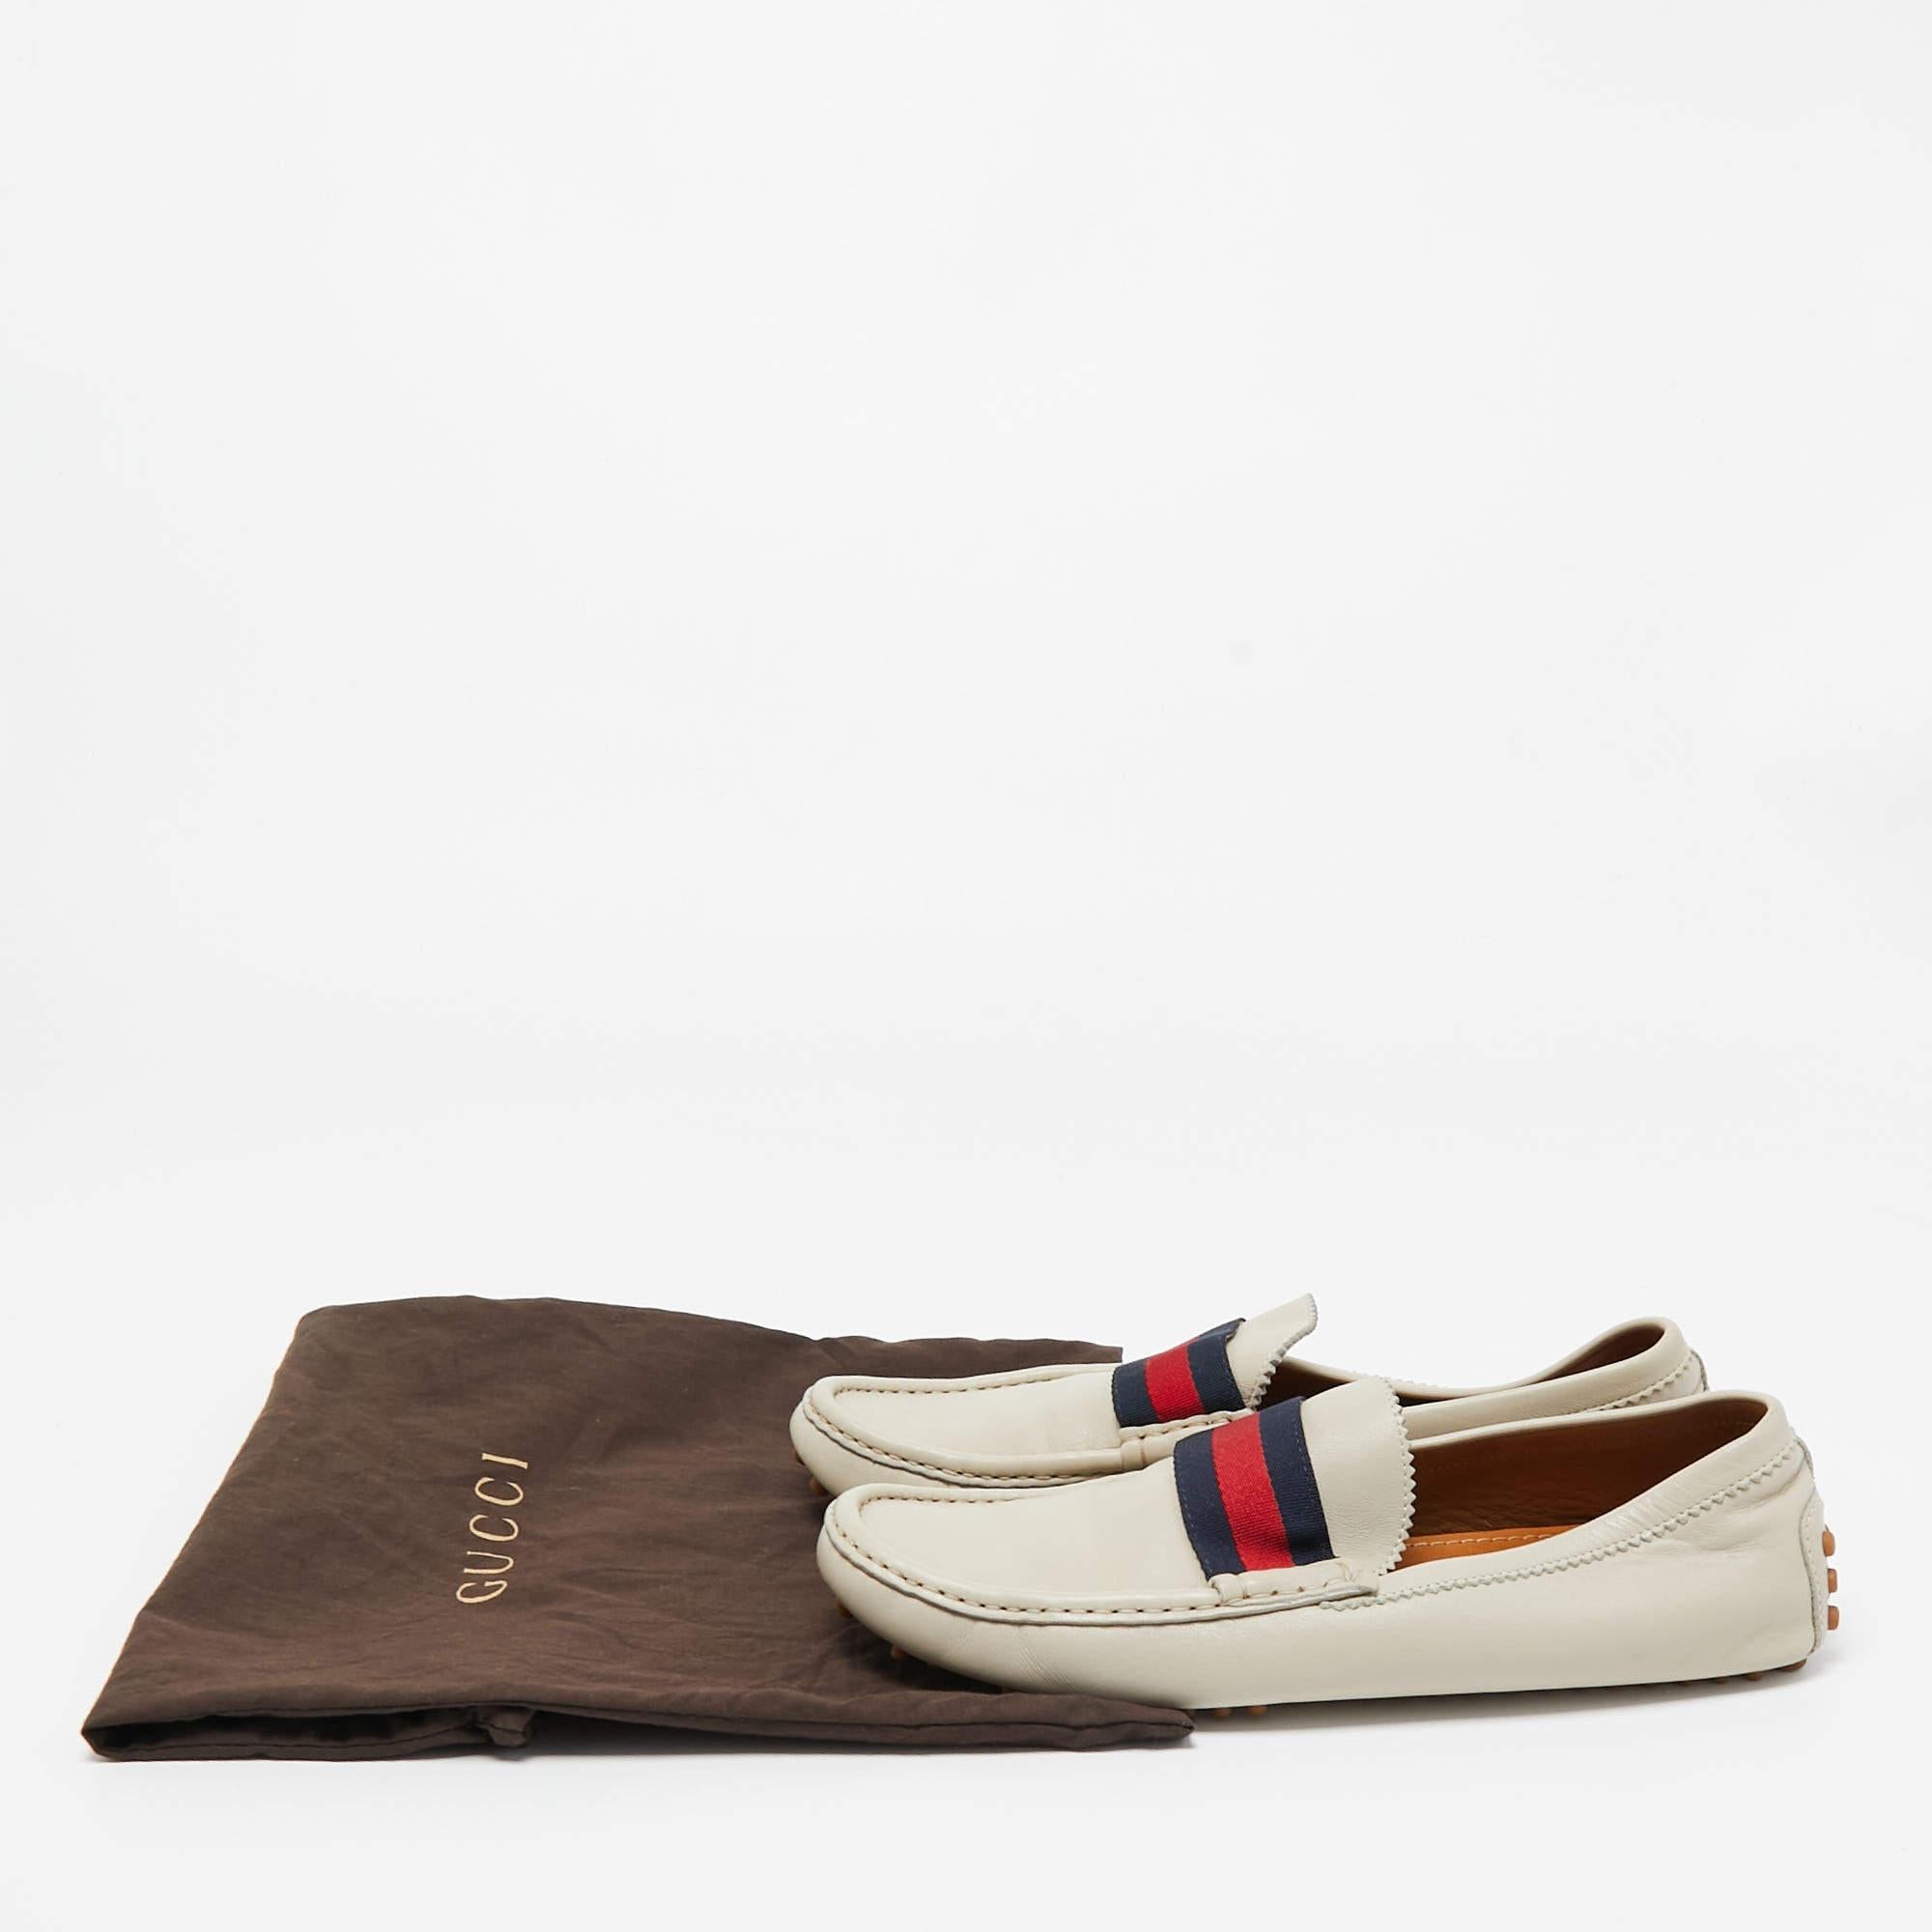 Gucci Cream Leather Web Slip On Loafers Size 43.5 3